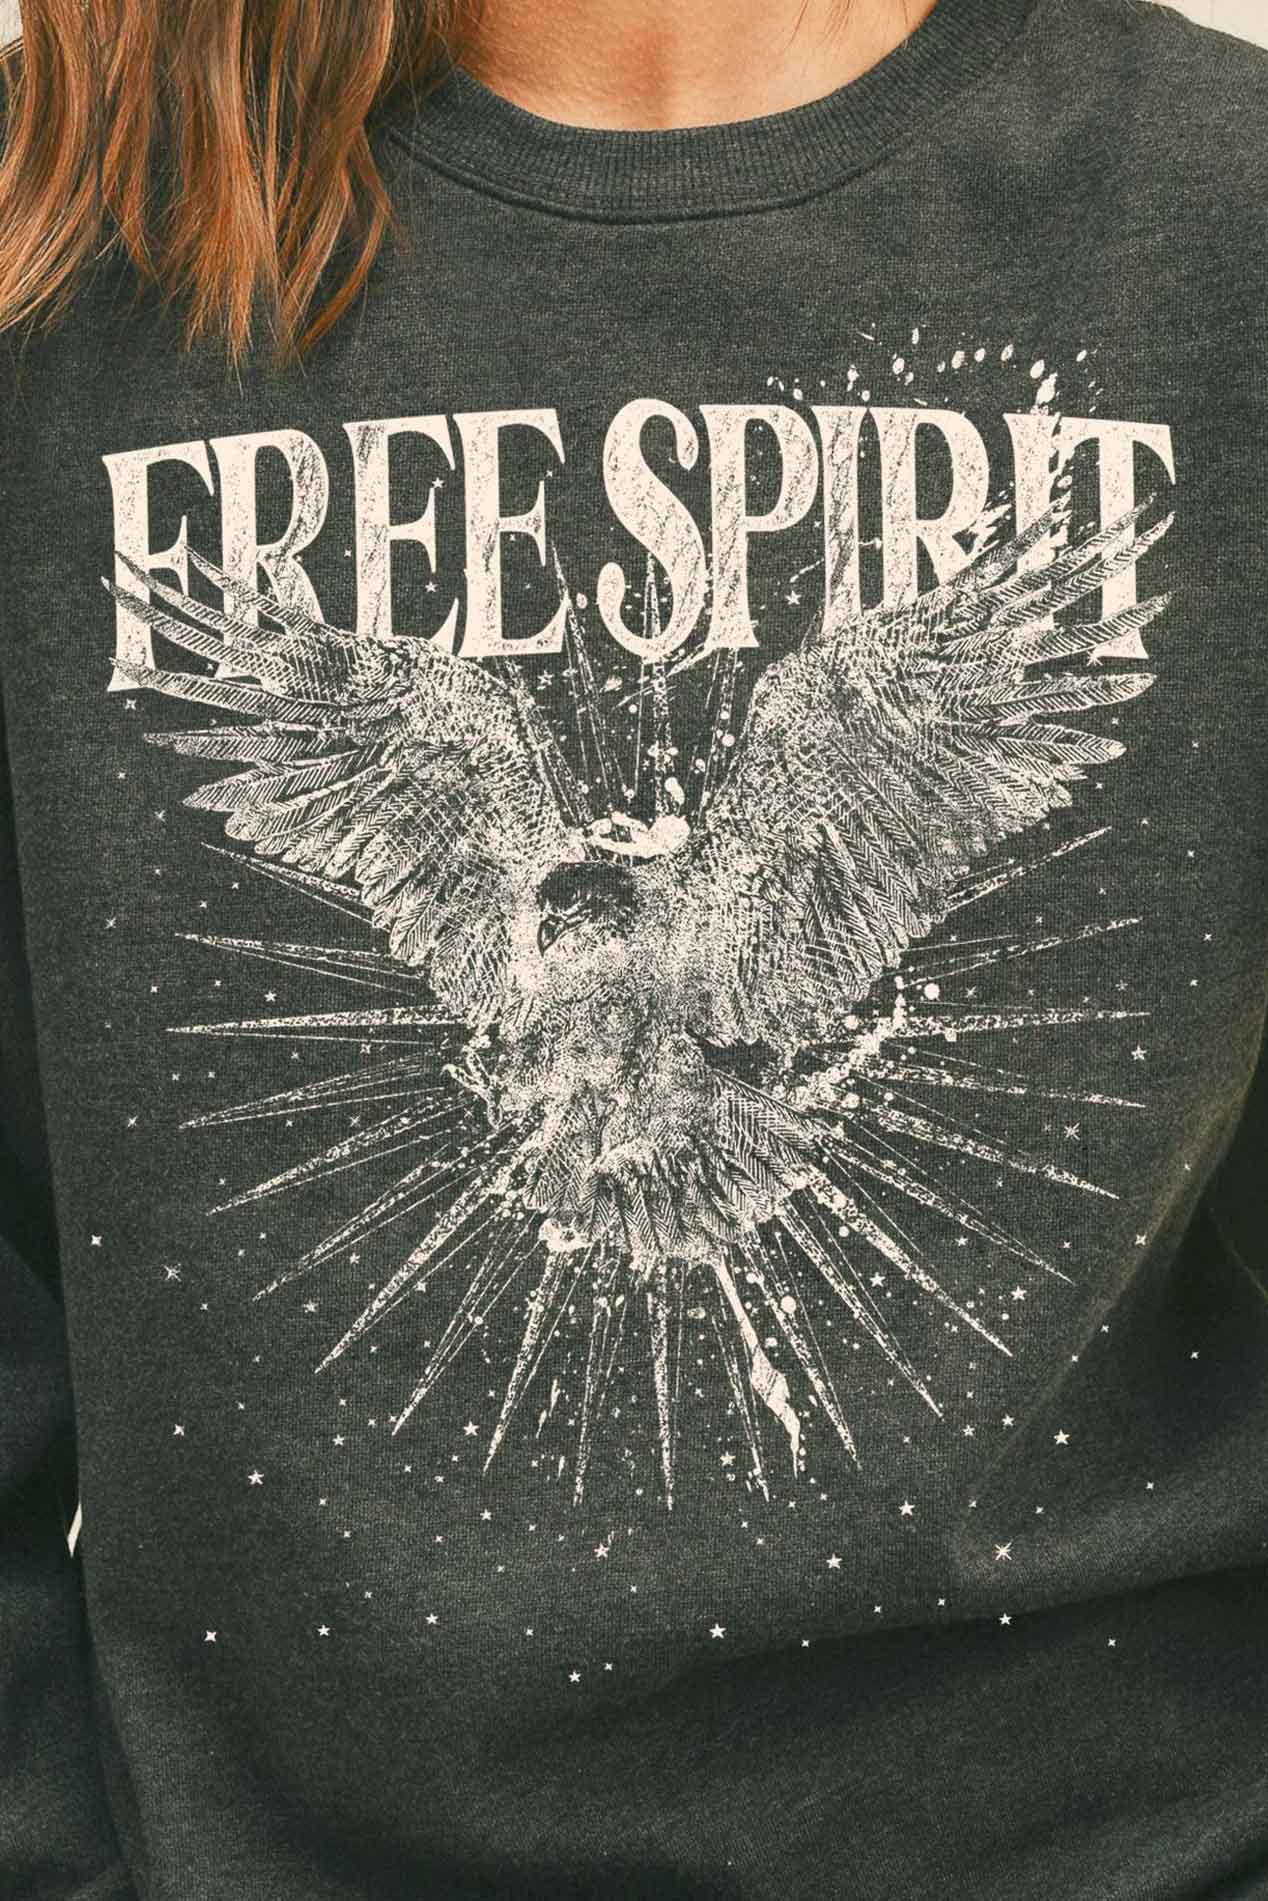 Load image into Gallery viewer, Free Spirit Graphic Cropped Sweatshirt
